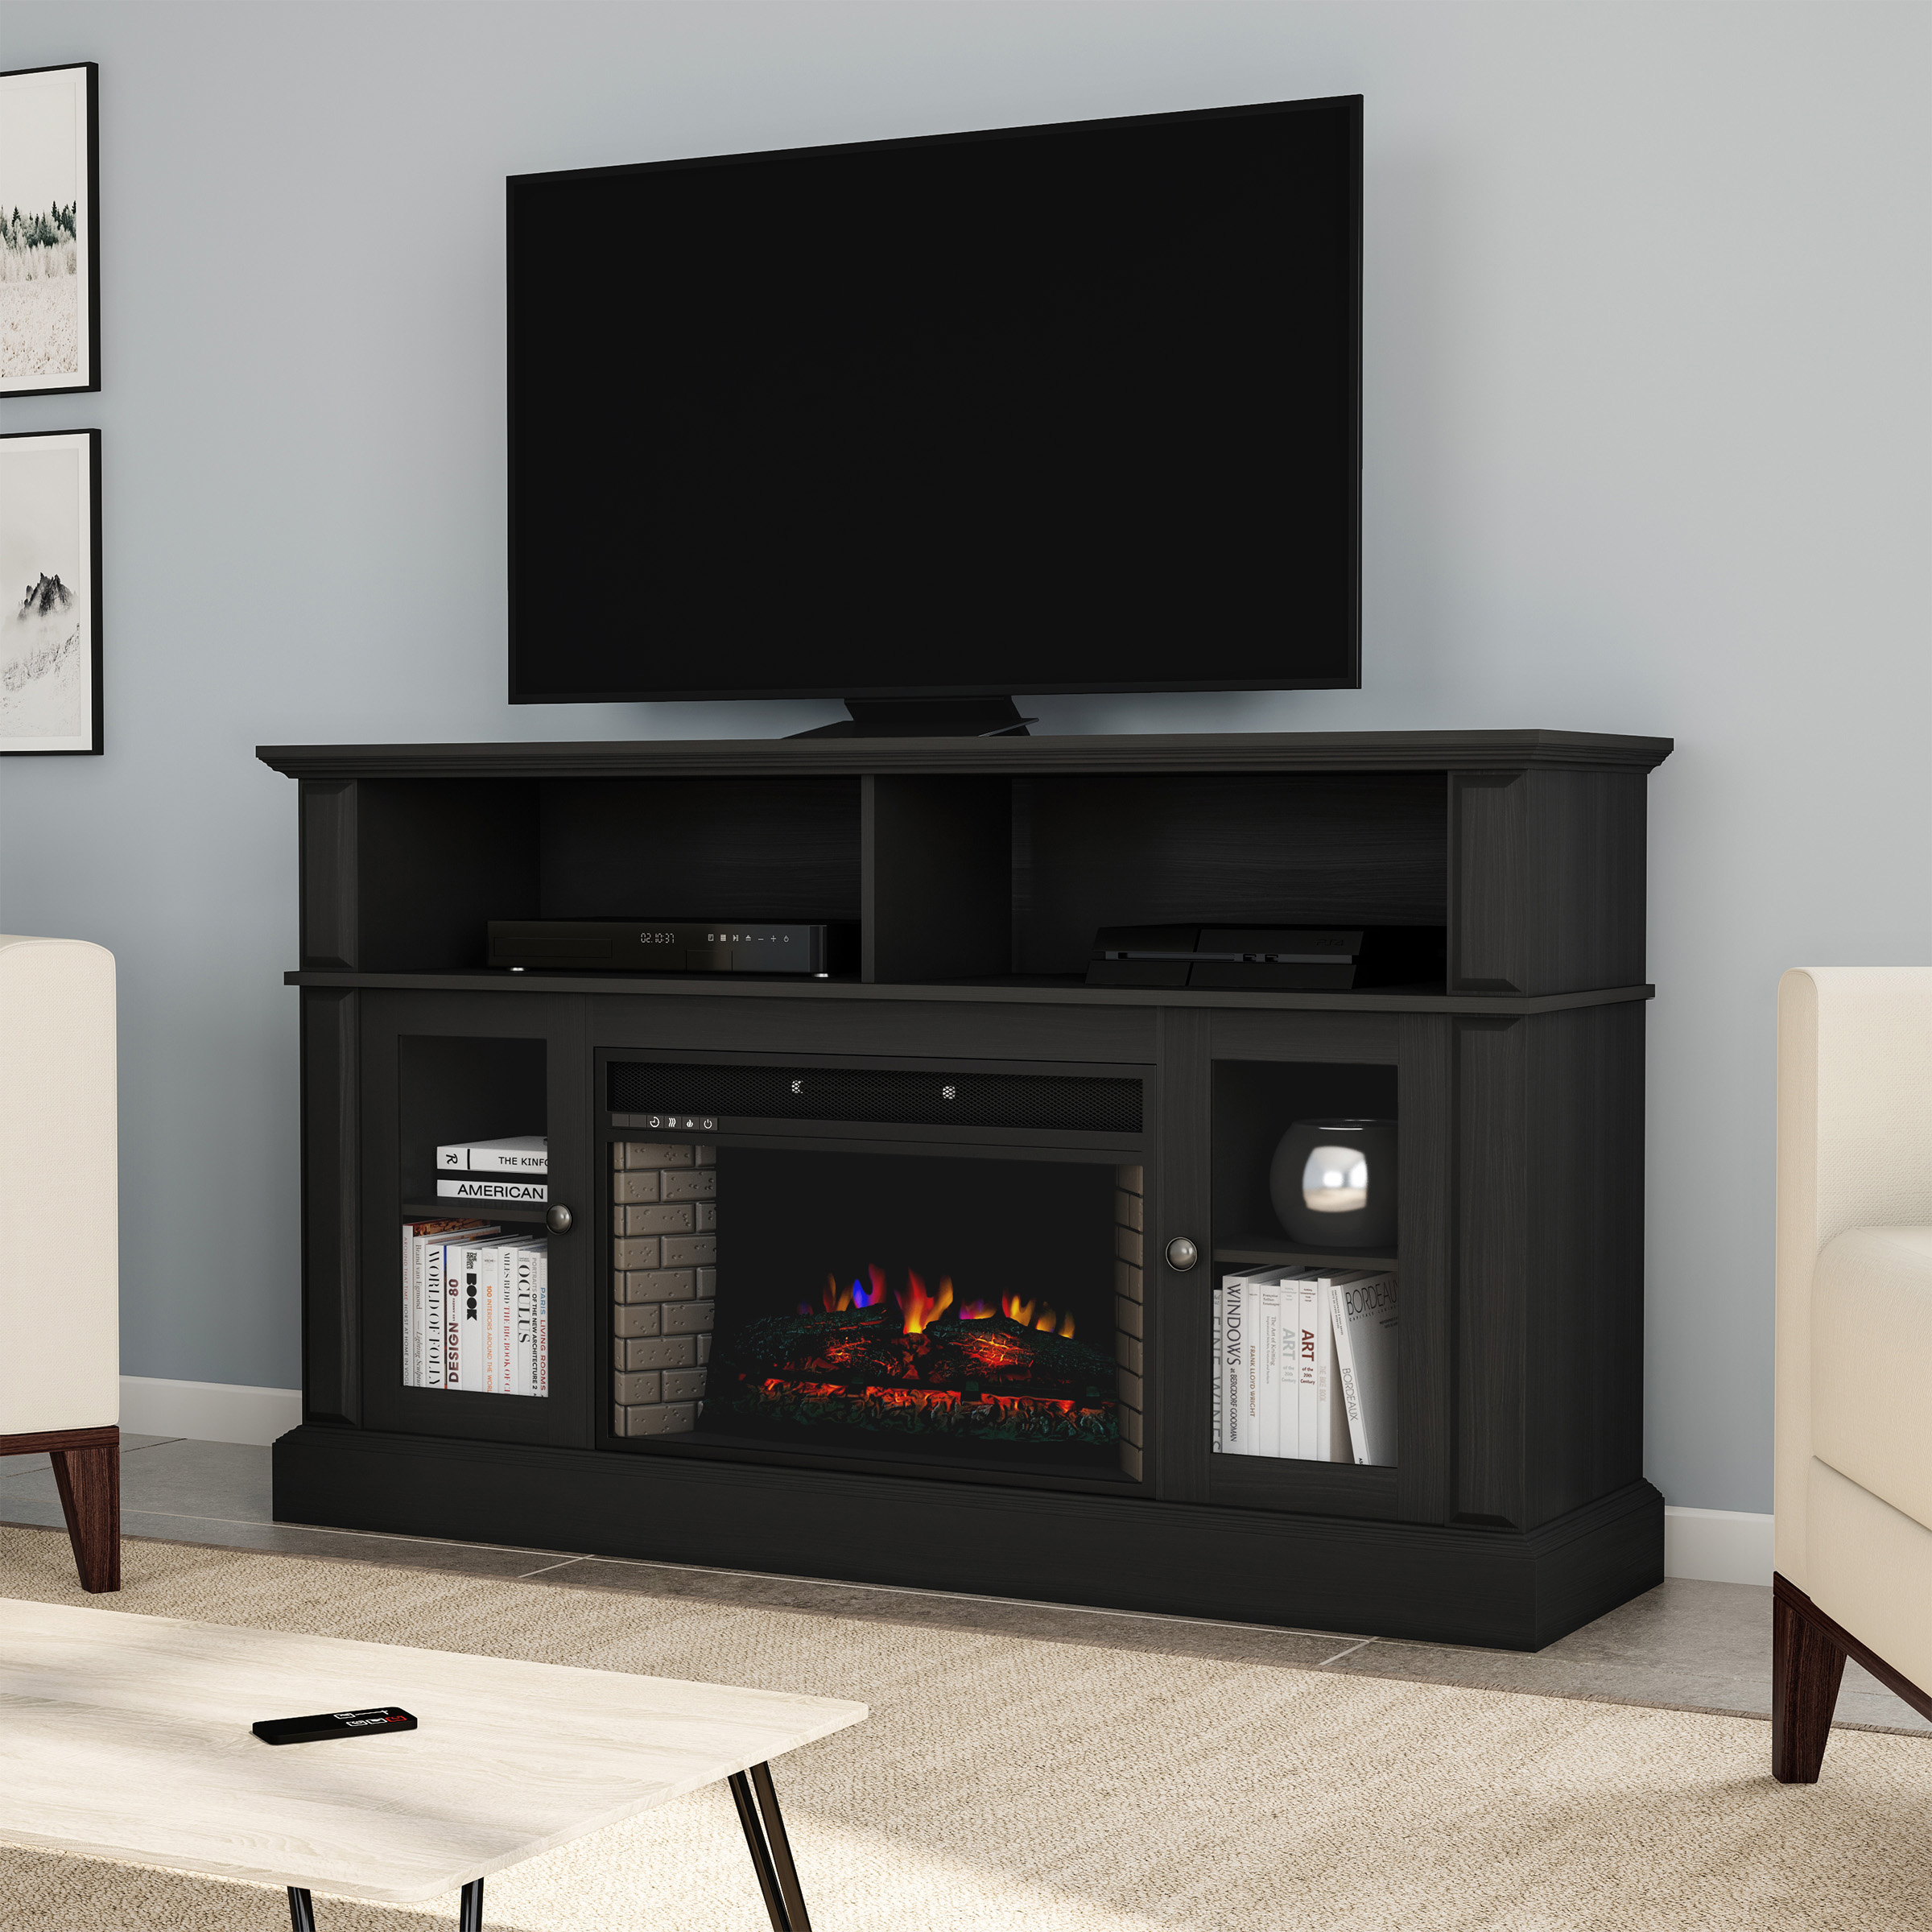 Muier TV Stand for TVs up to 65" with Fireplace Included